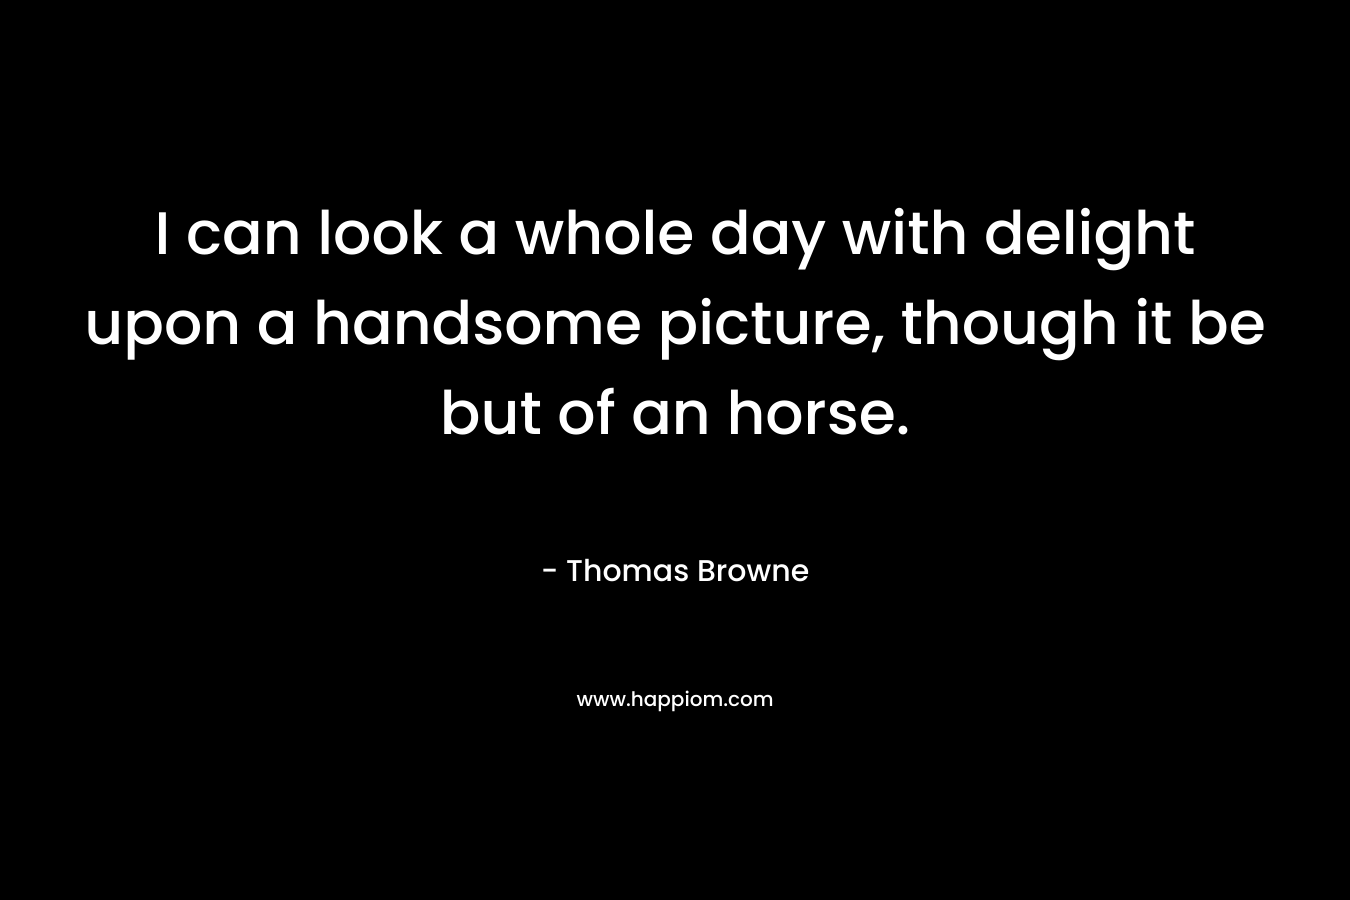 I can look a whole day with delight upon a handsome picture, though it be but of an horse.